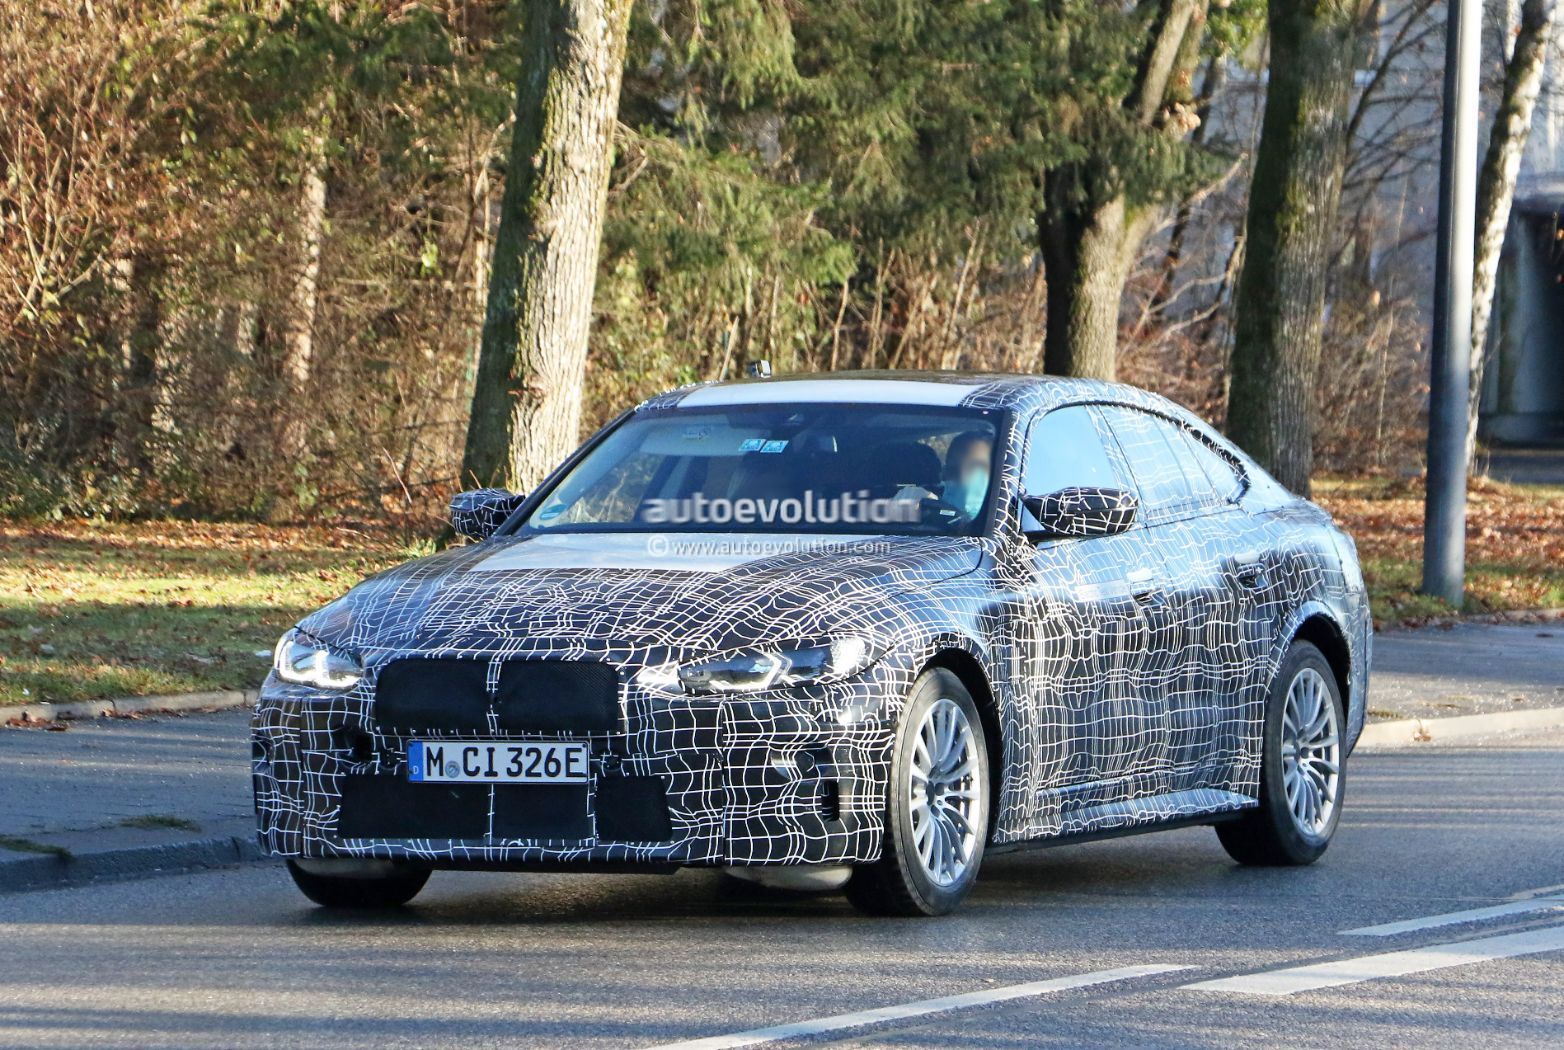 BMW i4 electric car facelift spotted